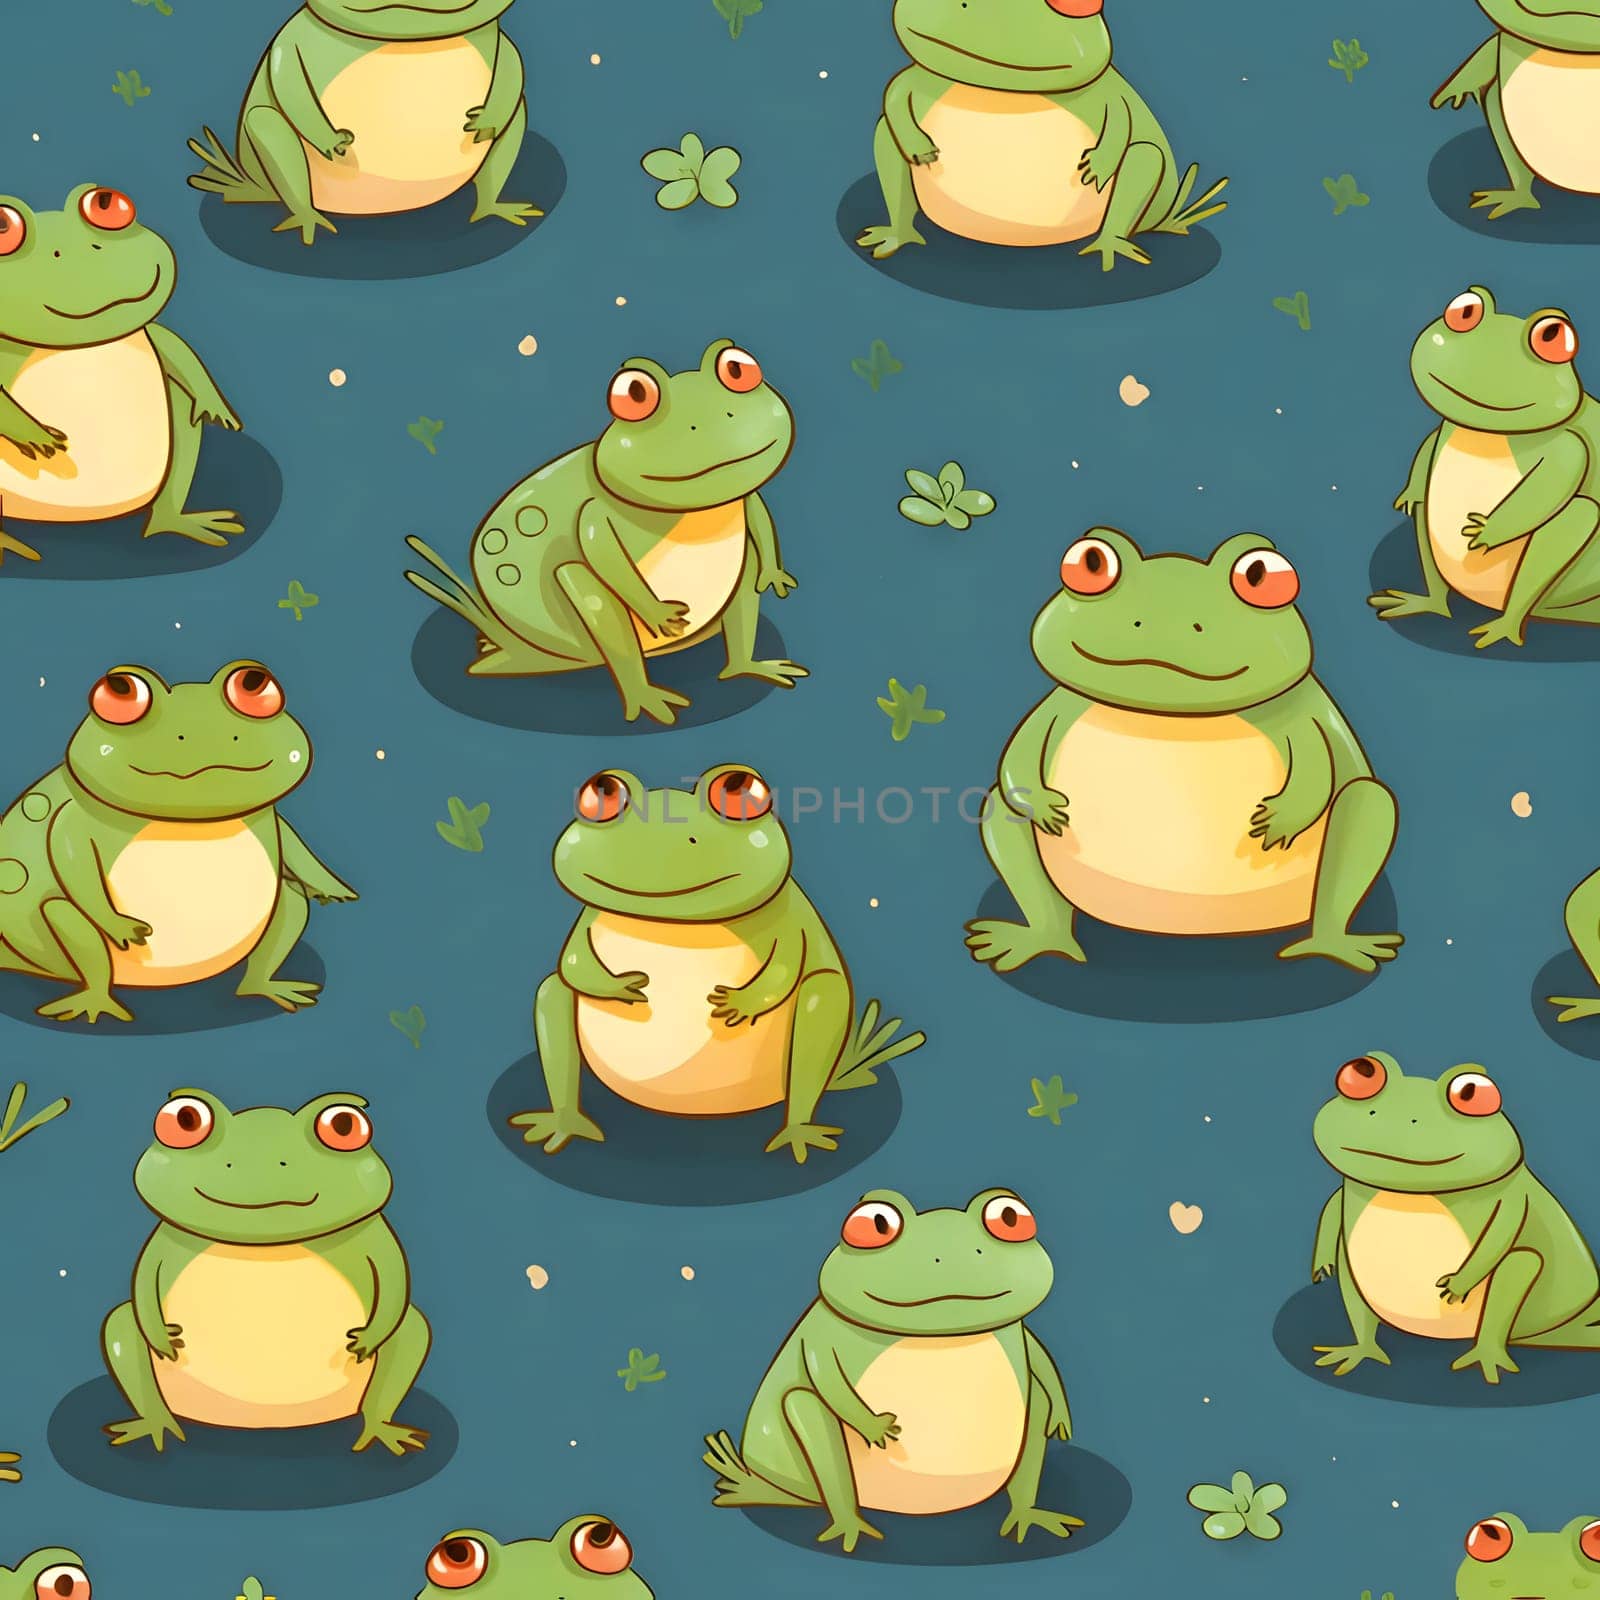 Patterns and banners backgrounds: Seamless pattern with frogs and clover. Vector illustration.